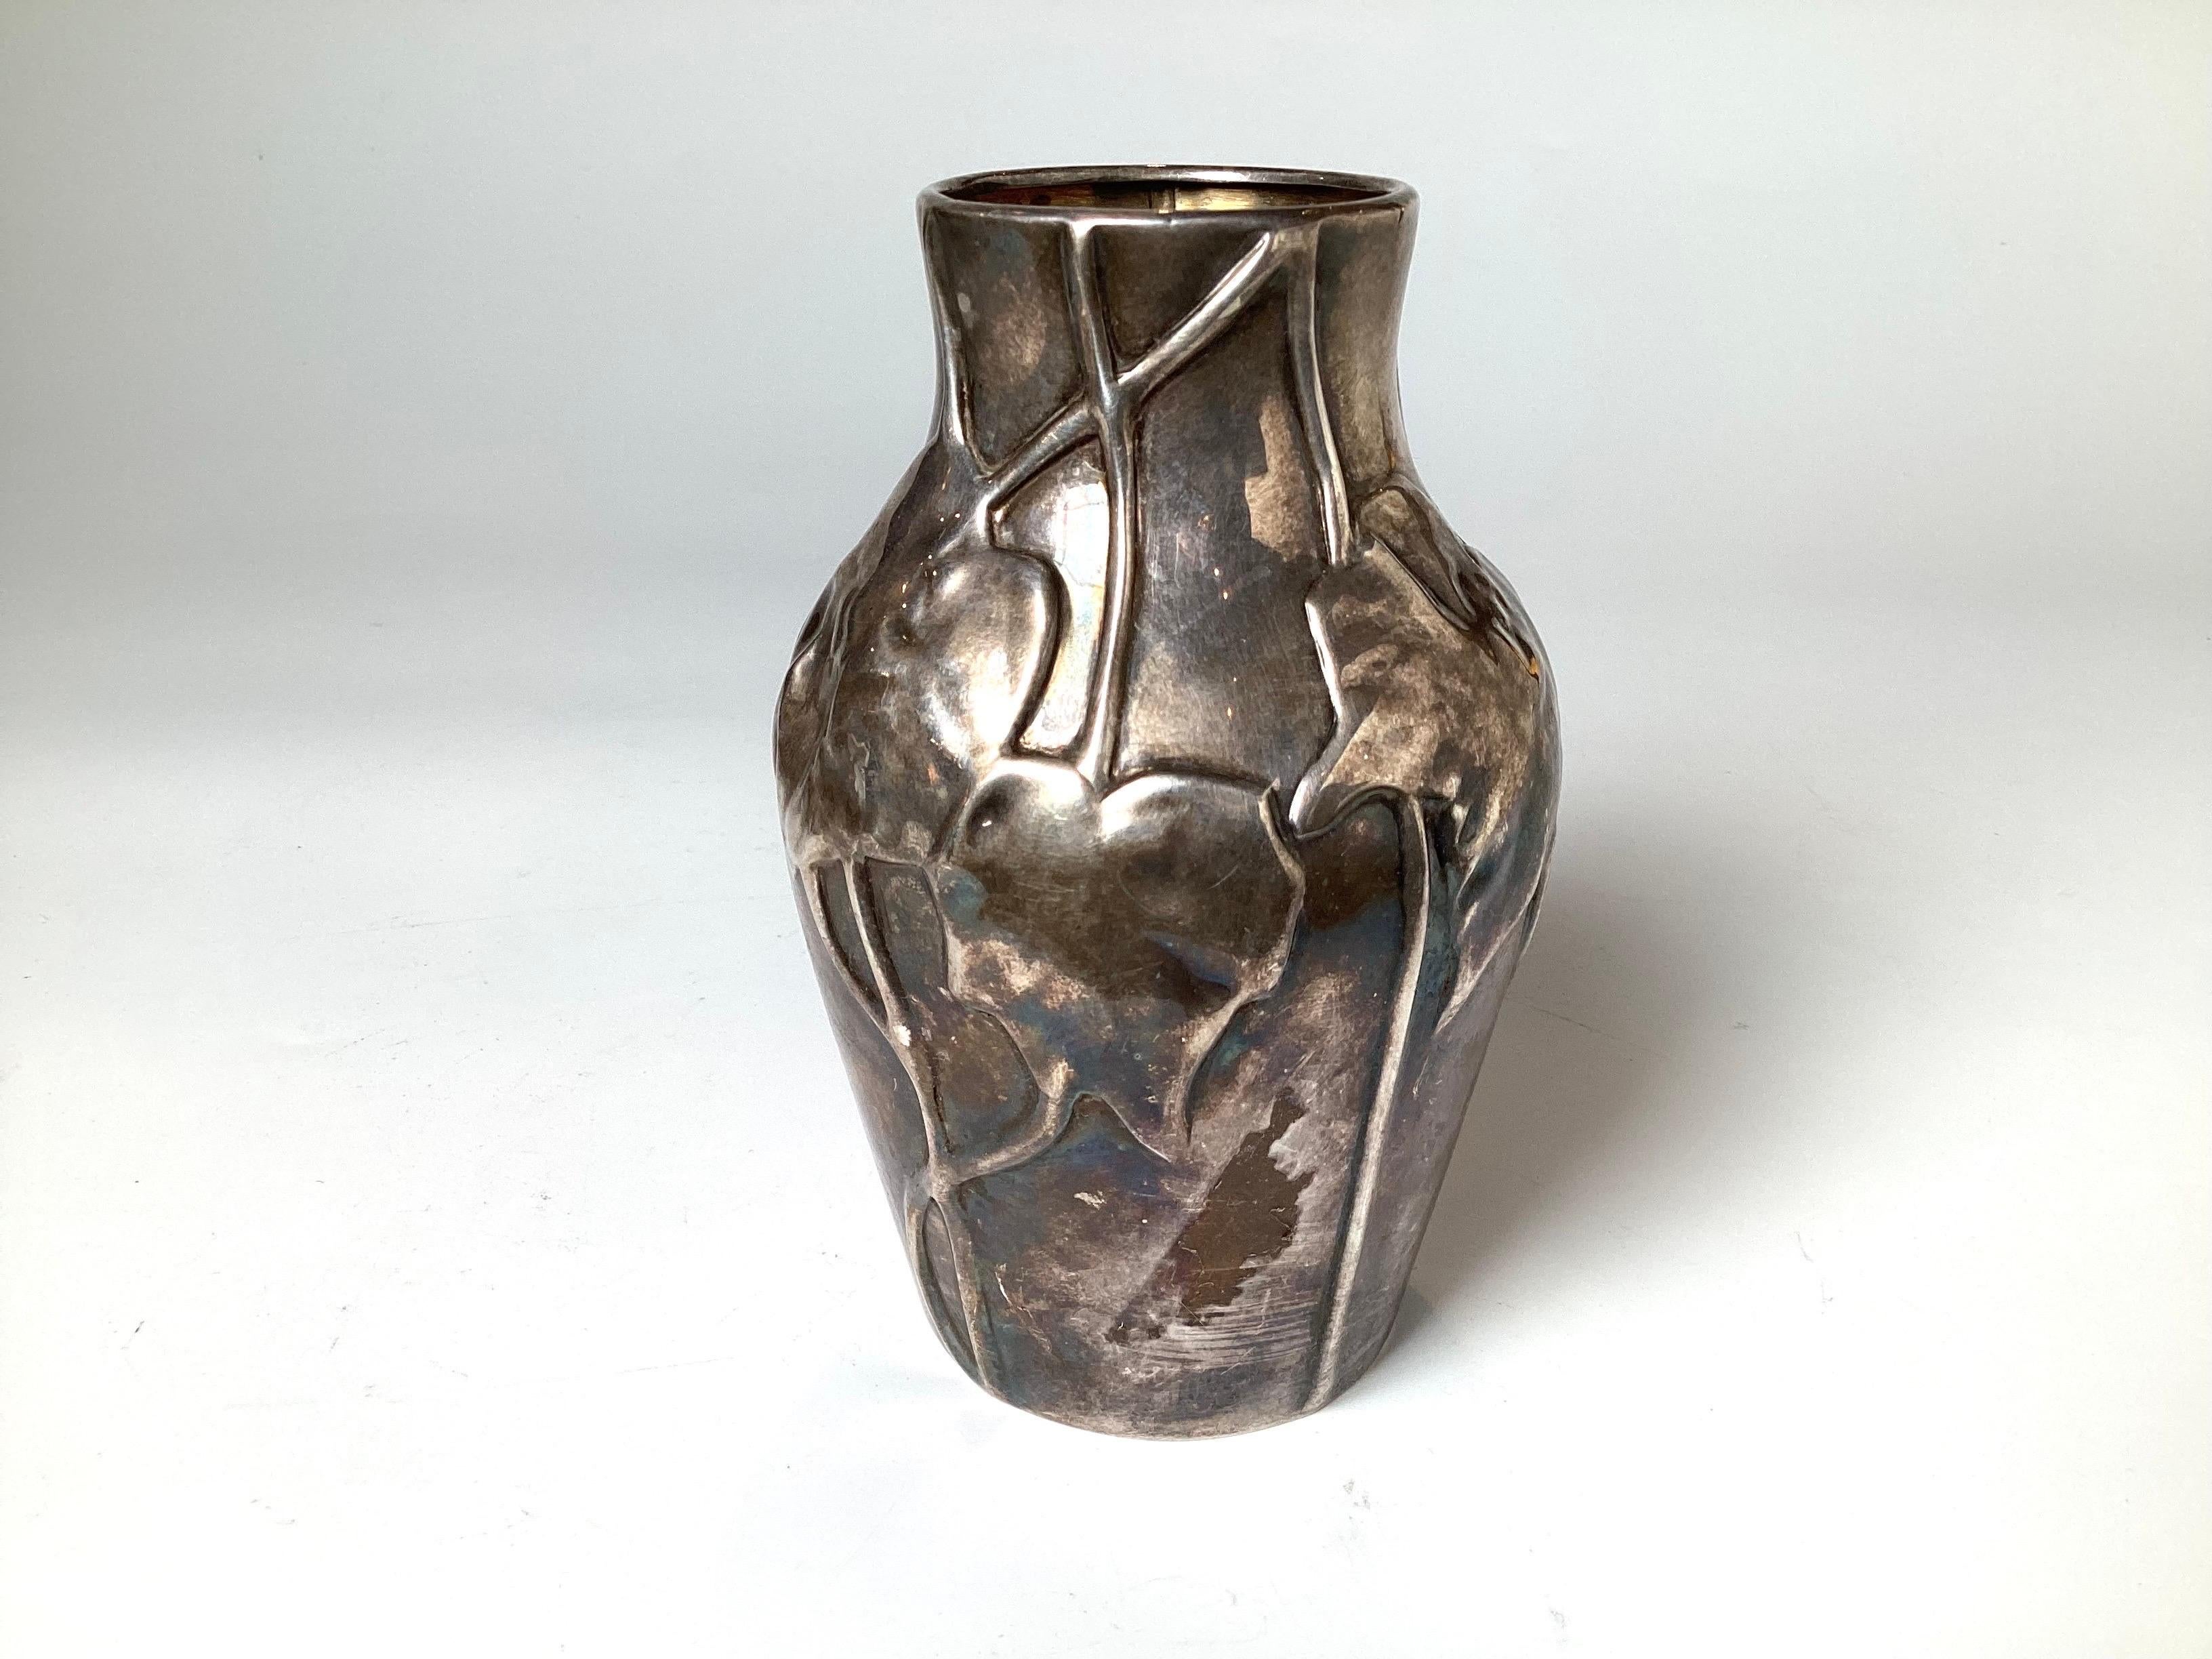 Tiffany and Company sterling silver art nouveau vase from the Louis Comfort Tiffany Collection. The art nouveau style with a leaf decoration all over, marked on bottom. 5.5 inches tall.